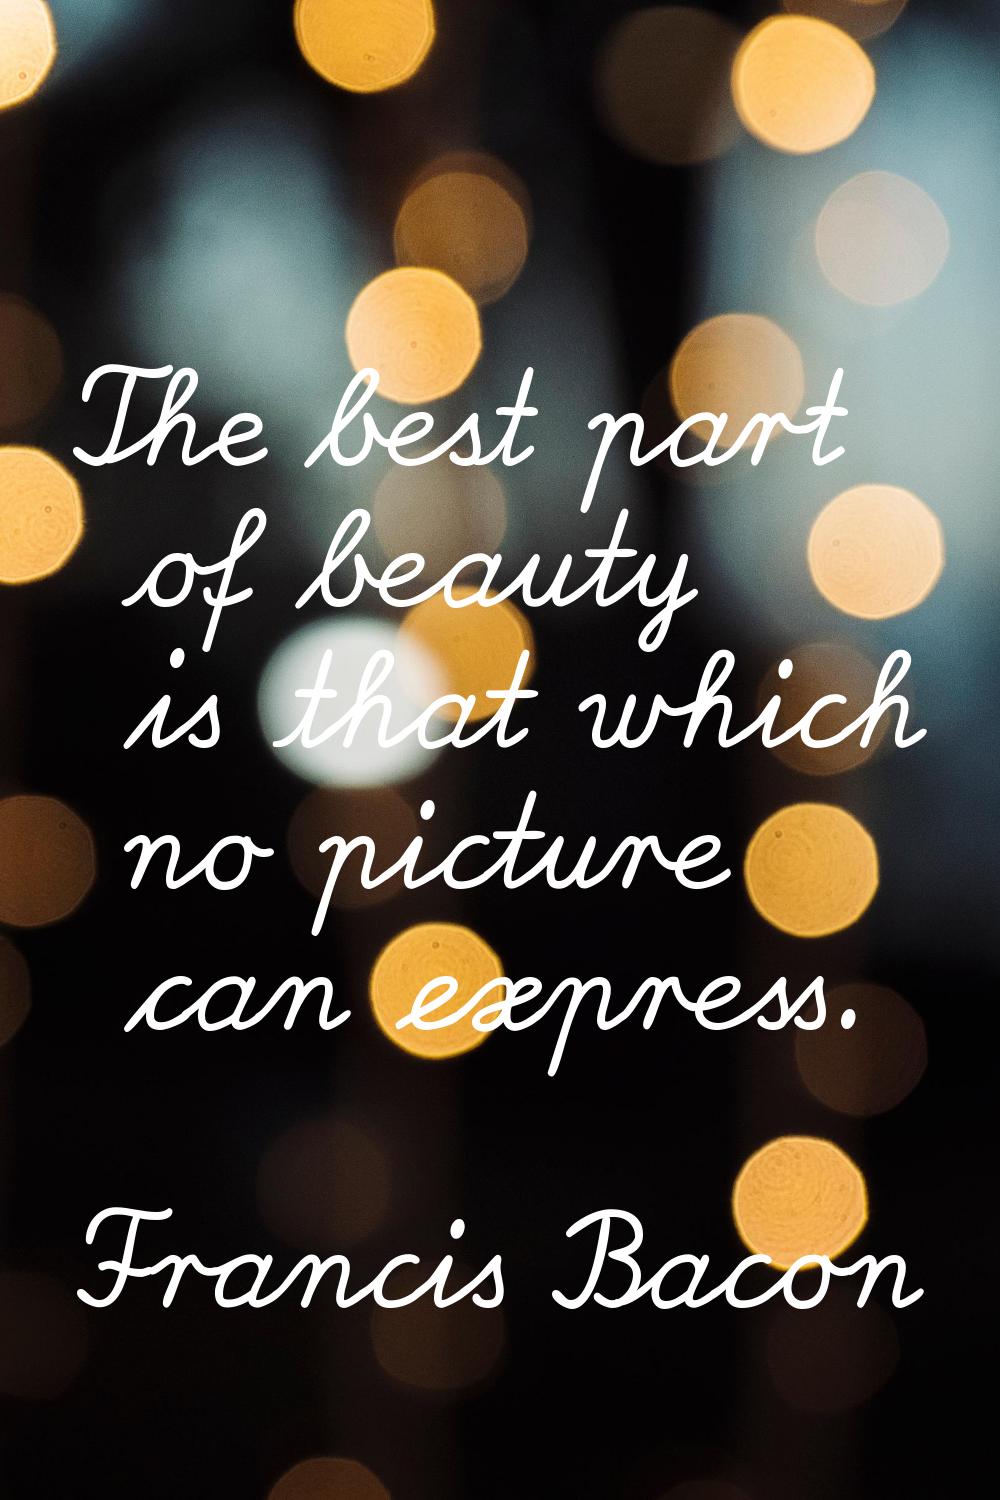 The best part of beauty is that which no picture can express.